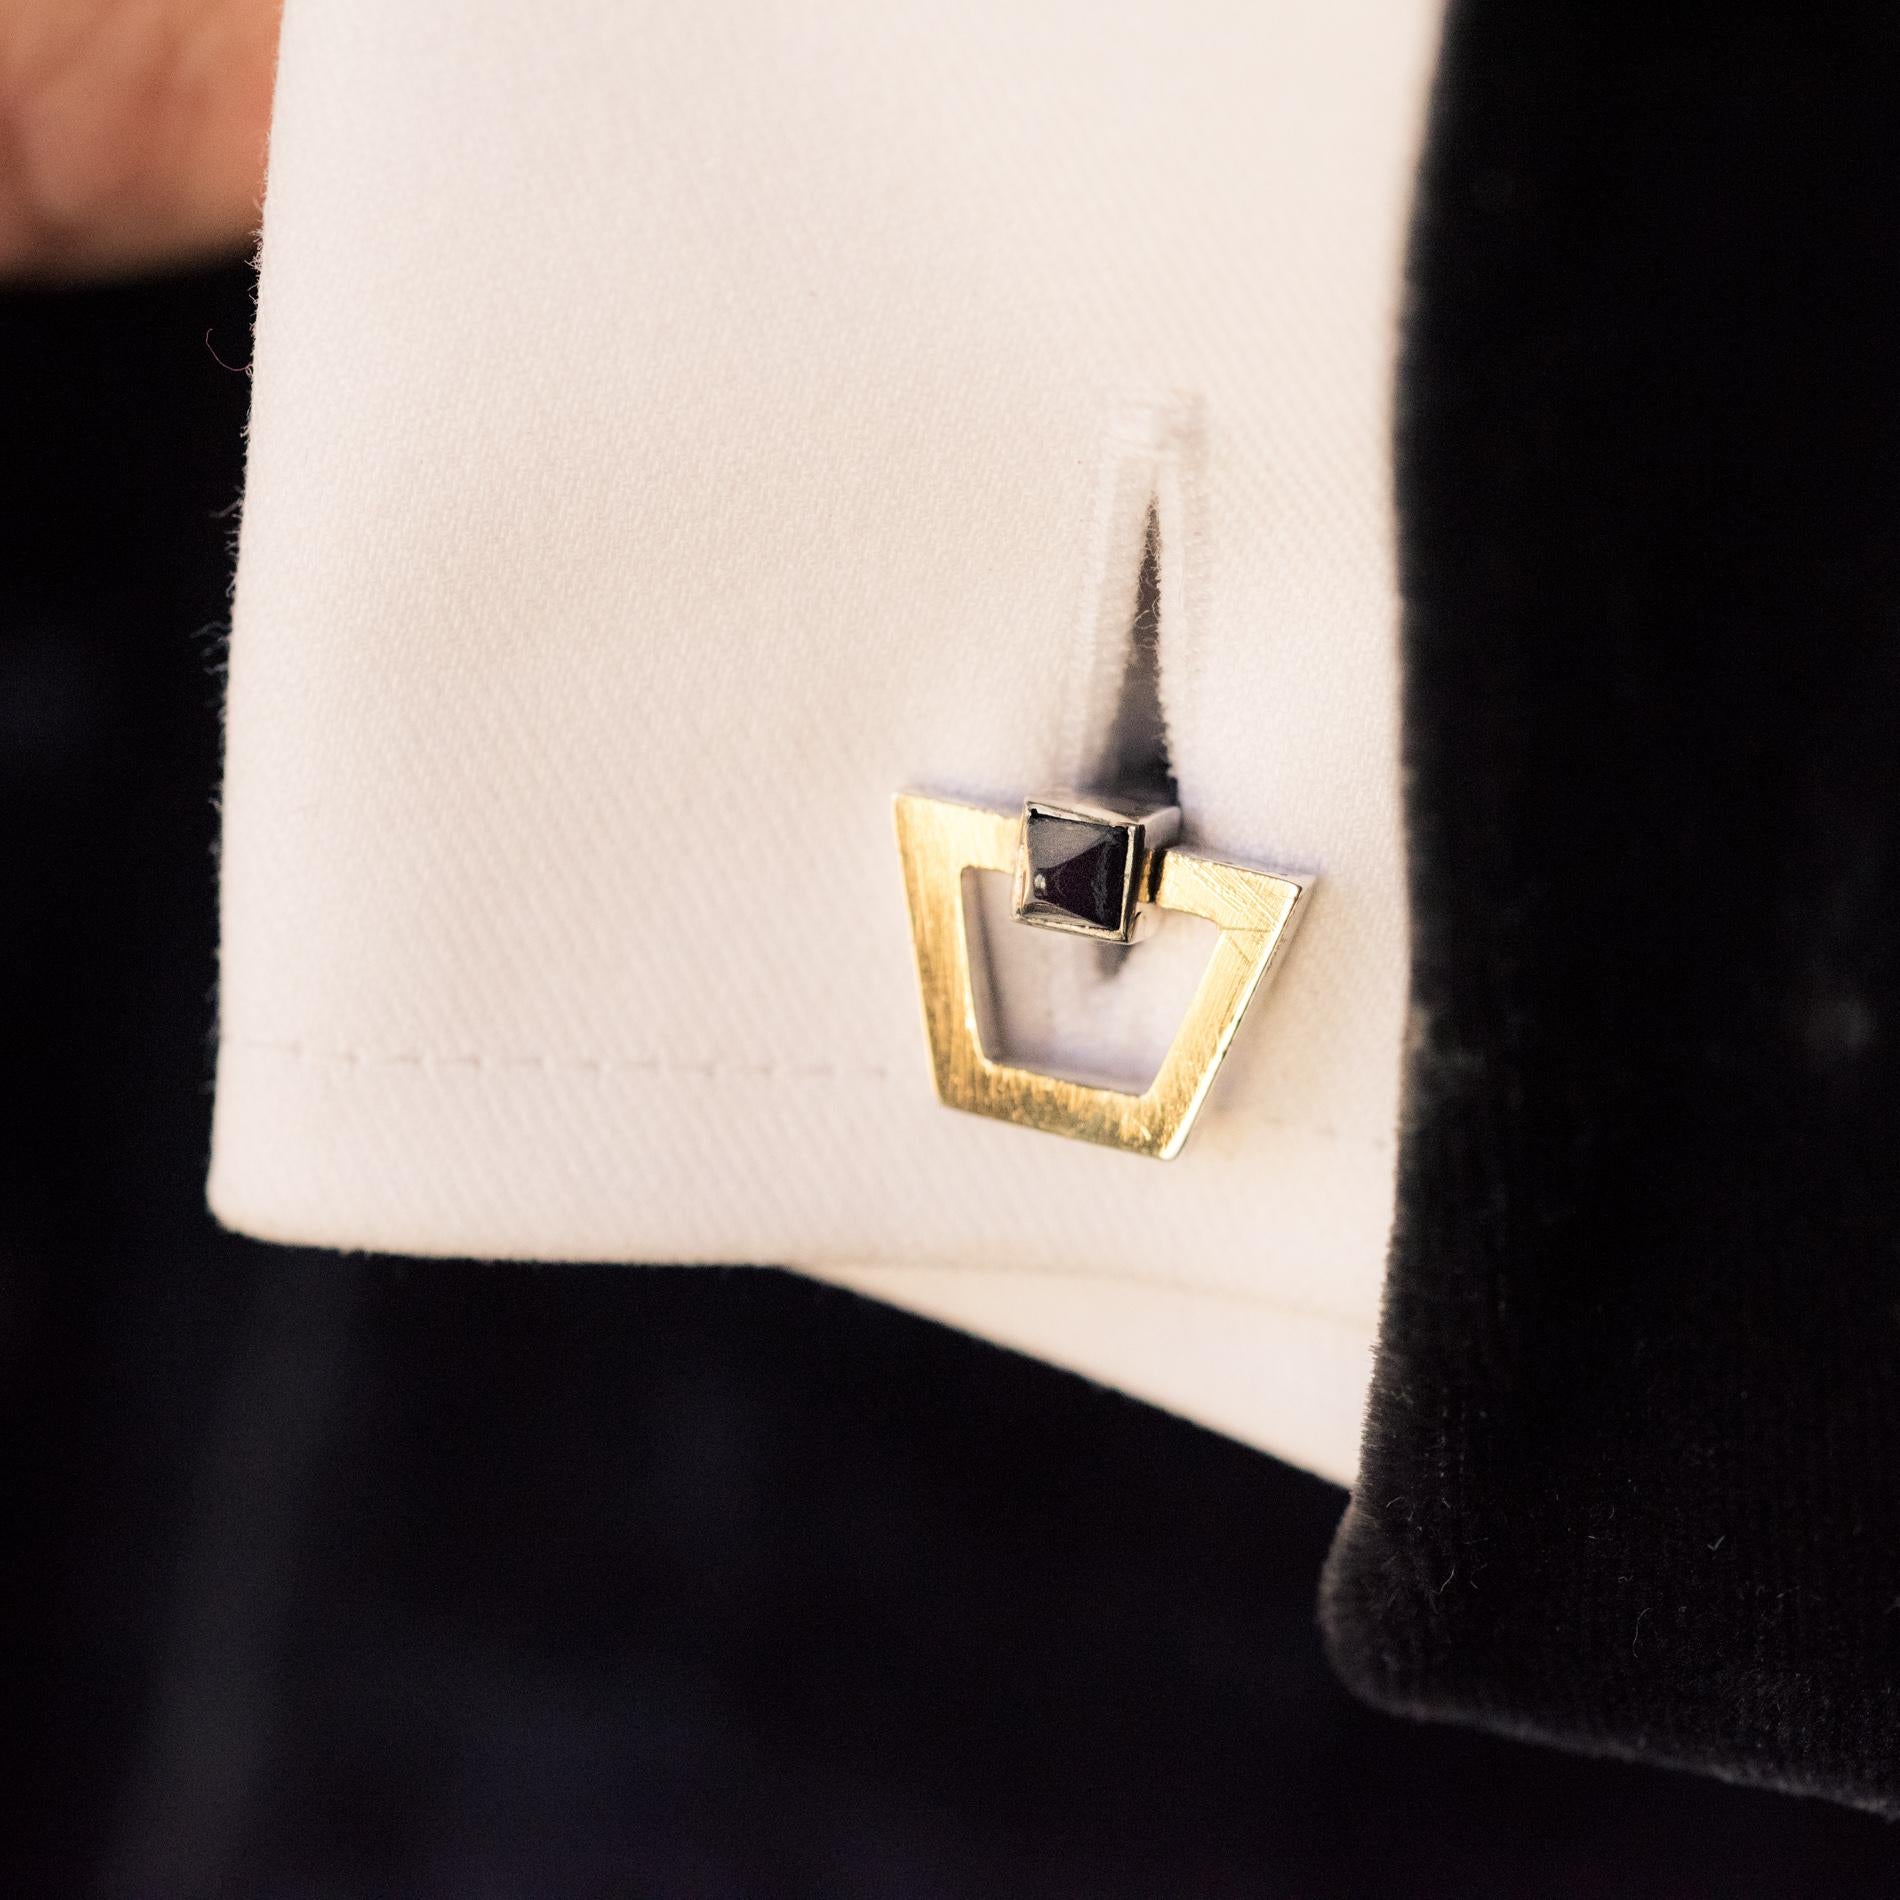 Pair of silver and vermeil cufflinks, mixed hallmark of eagle and boar's heads.
The central stem, of square section, is decorated with a black sugarloaf stone at each end on one of the cufflinks, and a blue stone for the other. The stones